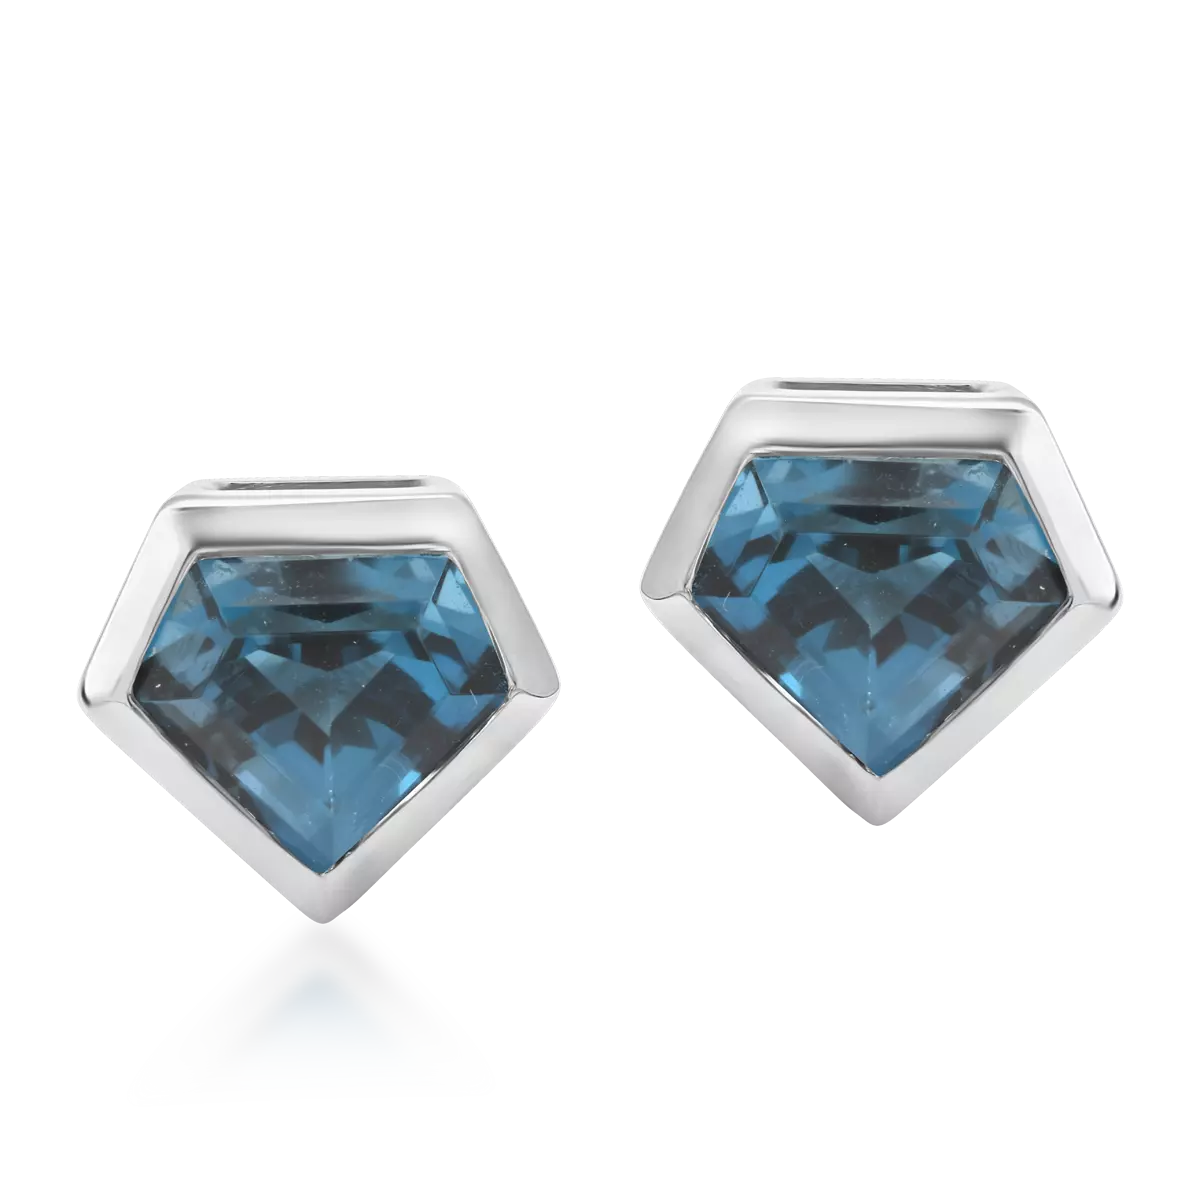 18K white gold earrings with 1.426ct london blue topaz